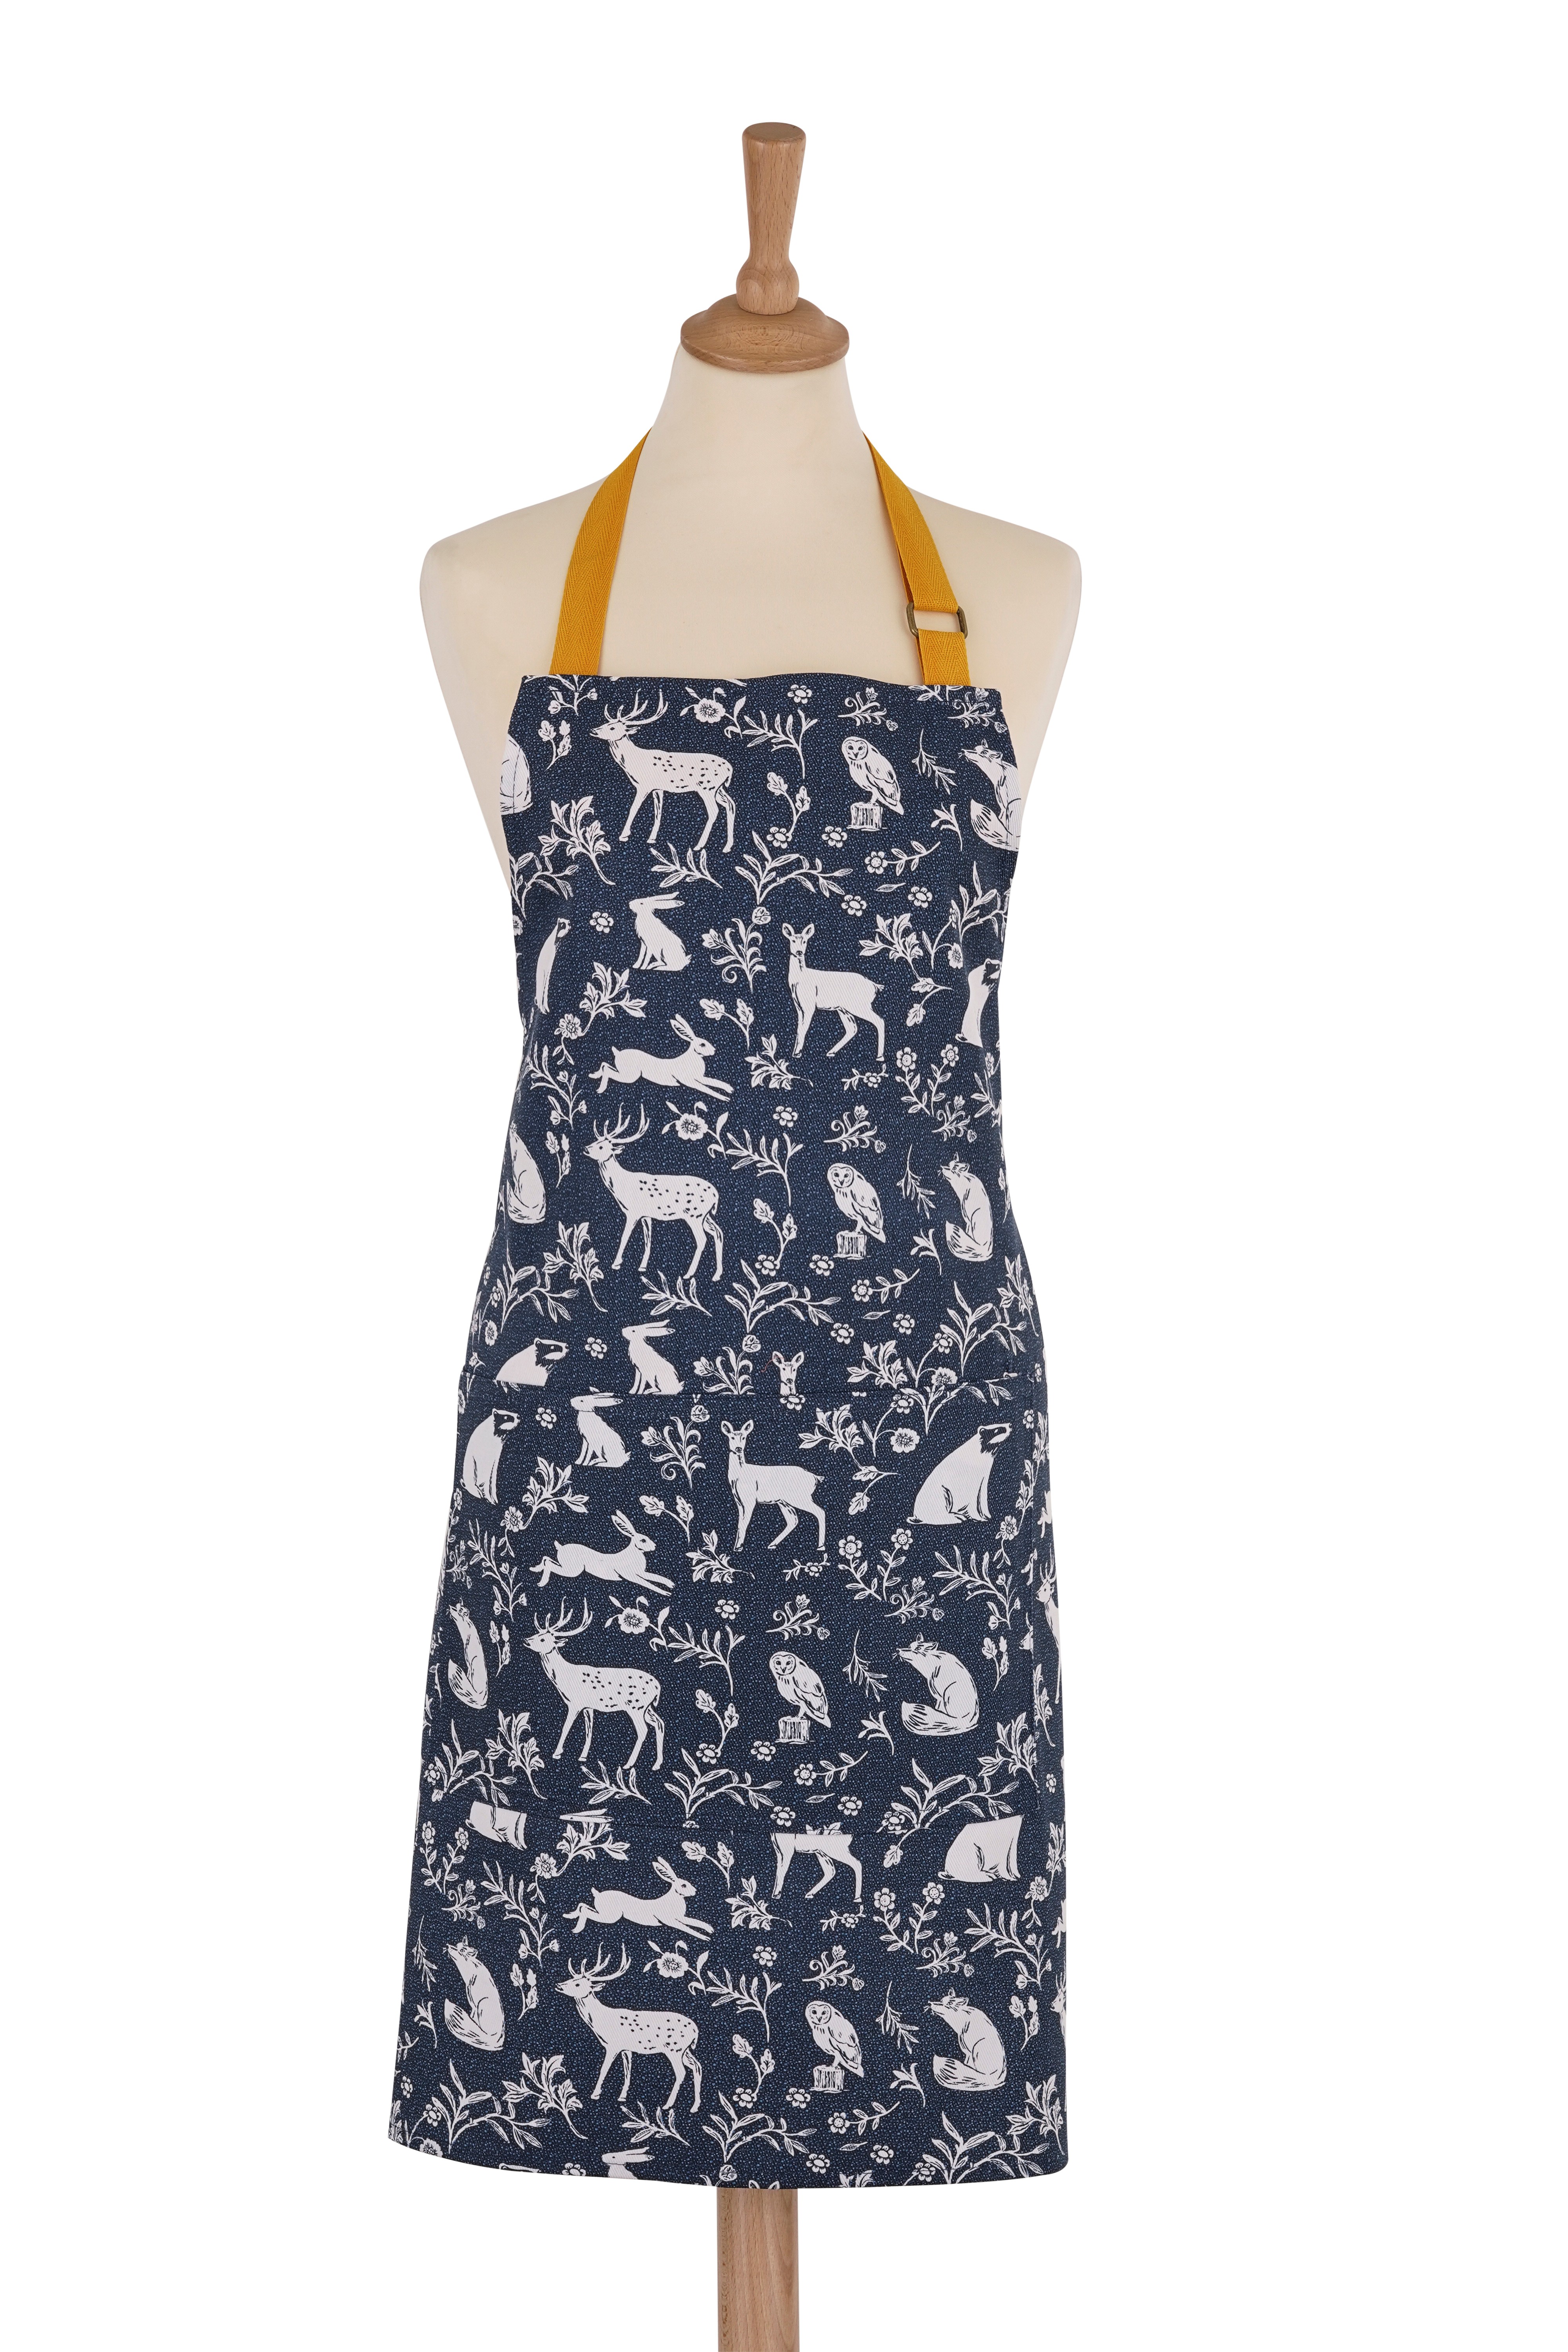 Ulster Weavers Cotton Apron Forest Friends Navy